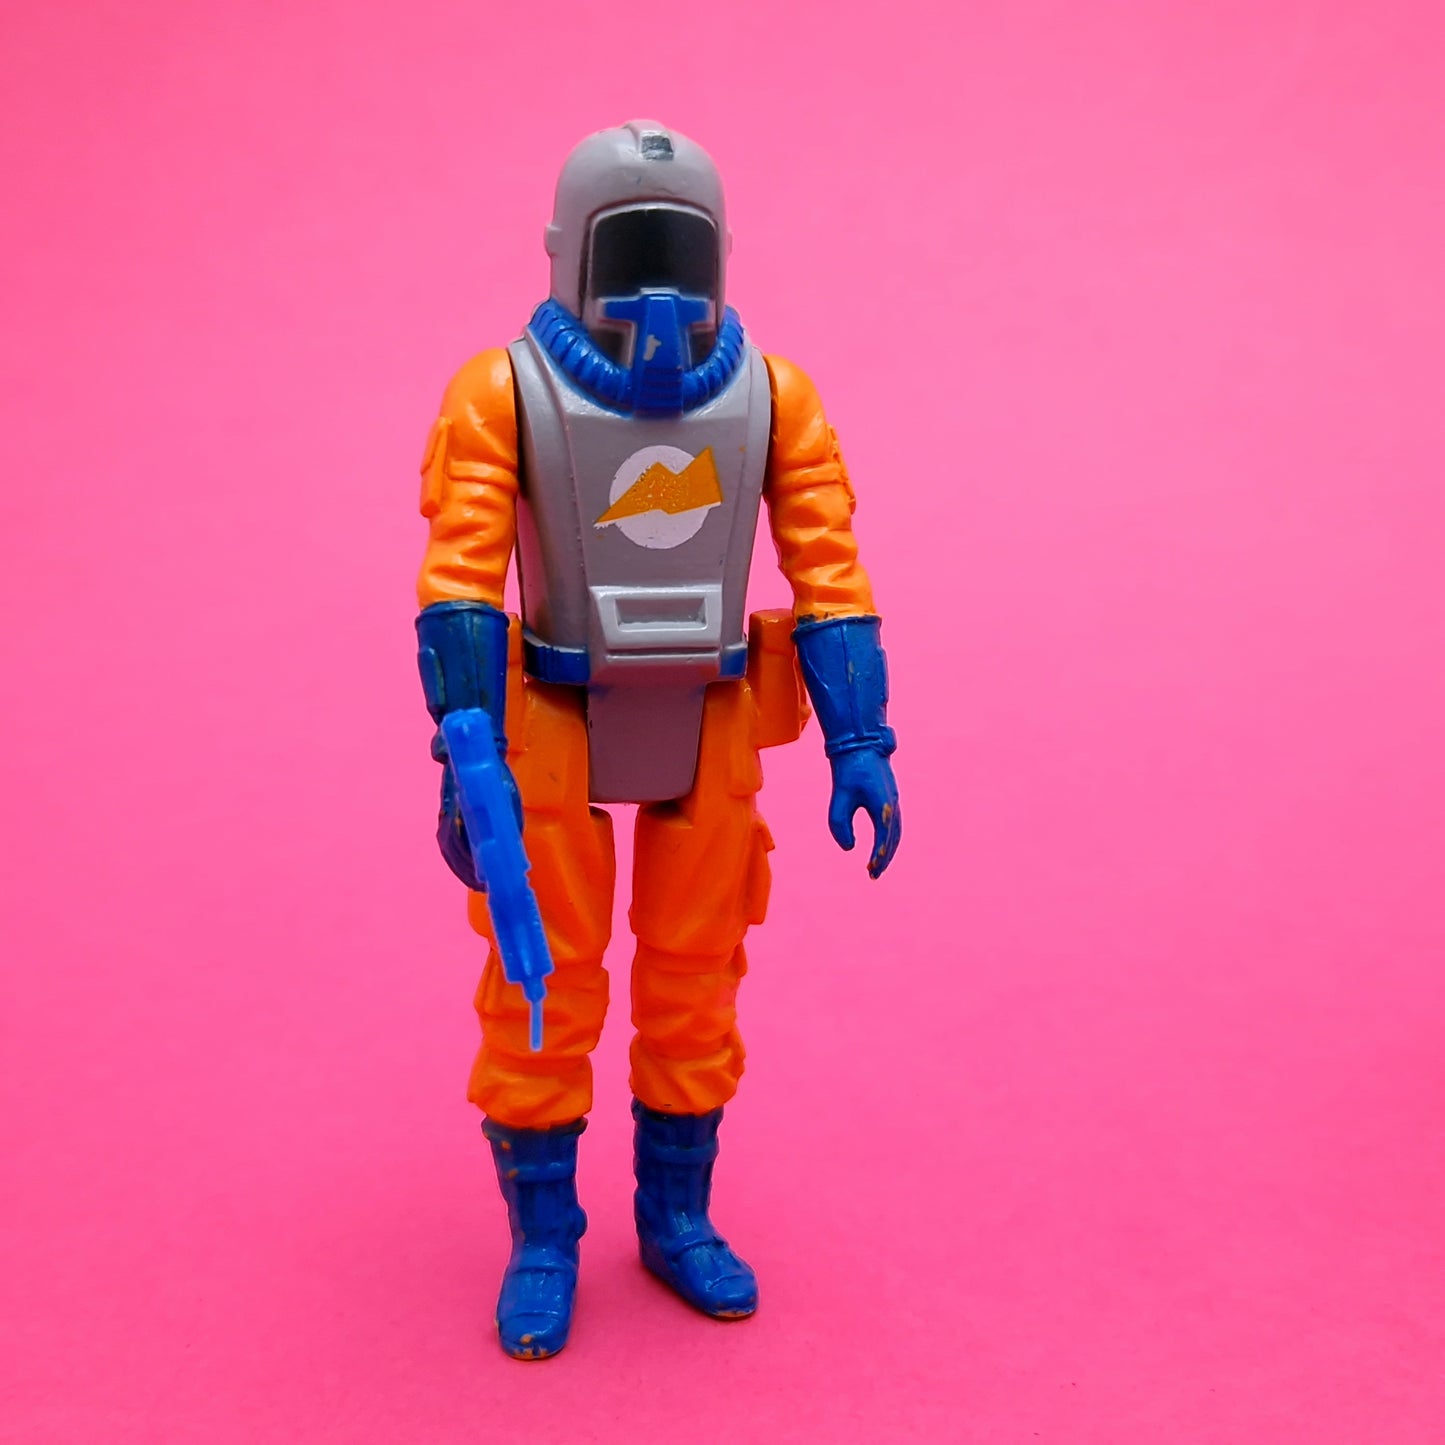 ACTION FORCE ☆ SECRUITY TROOPER SATELLITE DEFENCE Action Figure ☆ Palitoy Euro